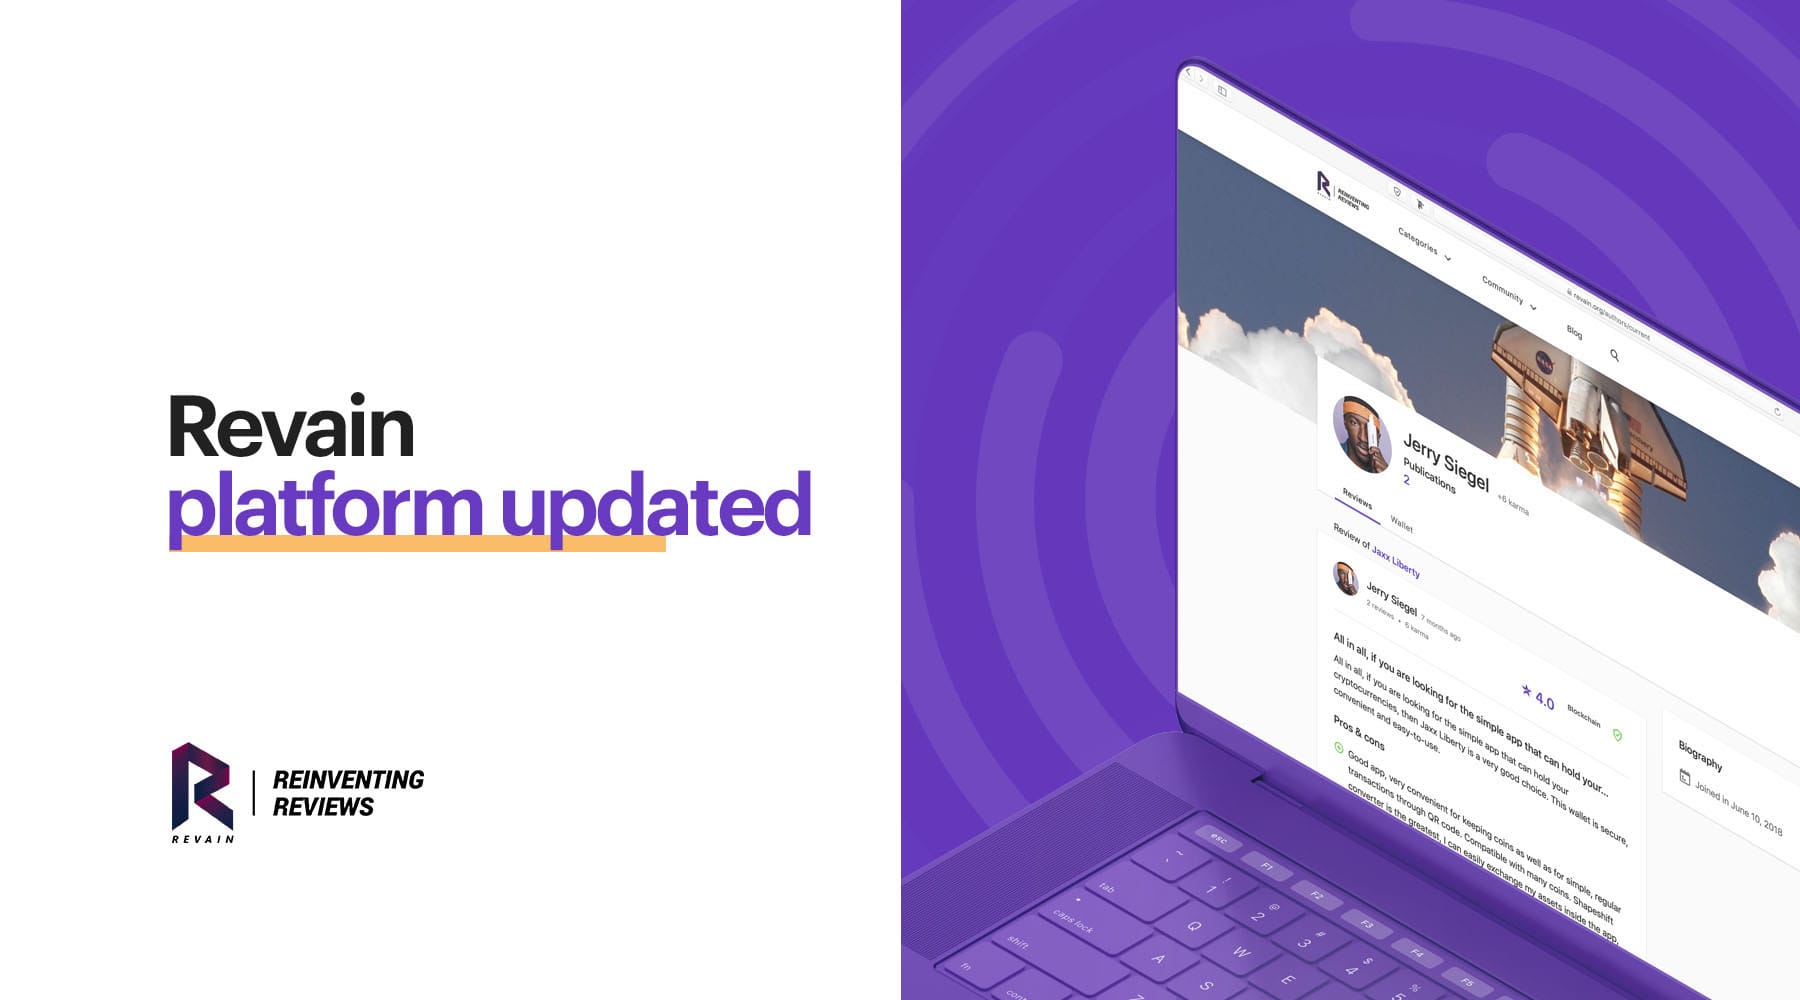  Revain platform update: Experts page, Latest reviews and more